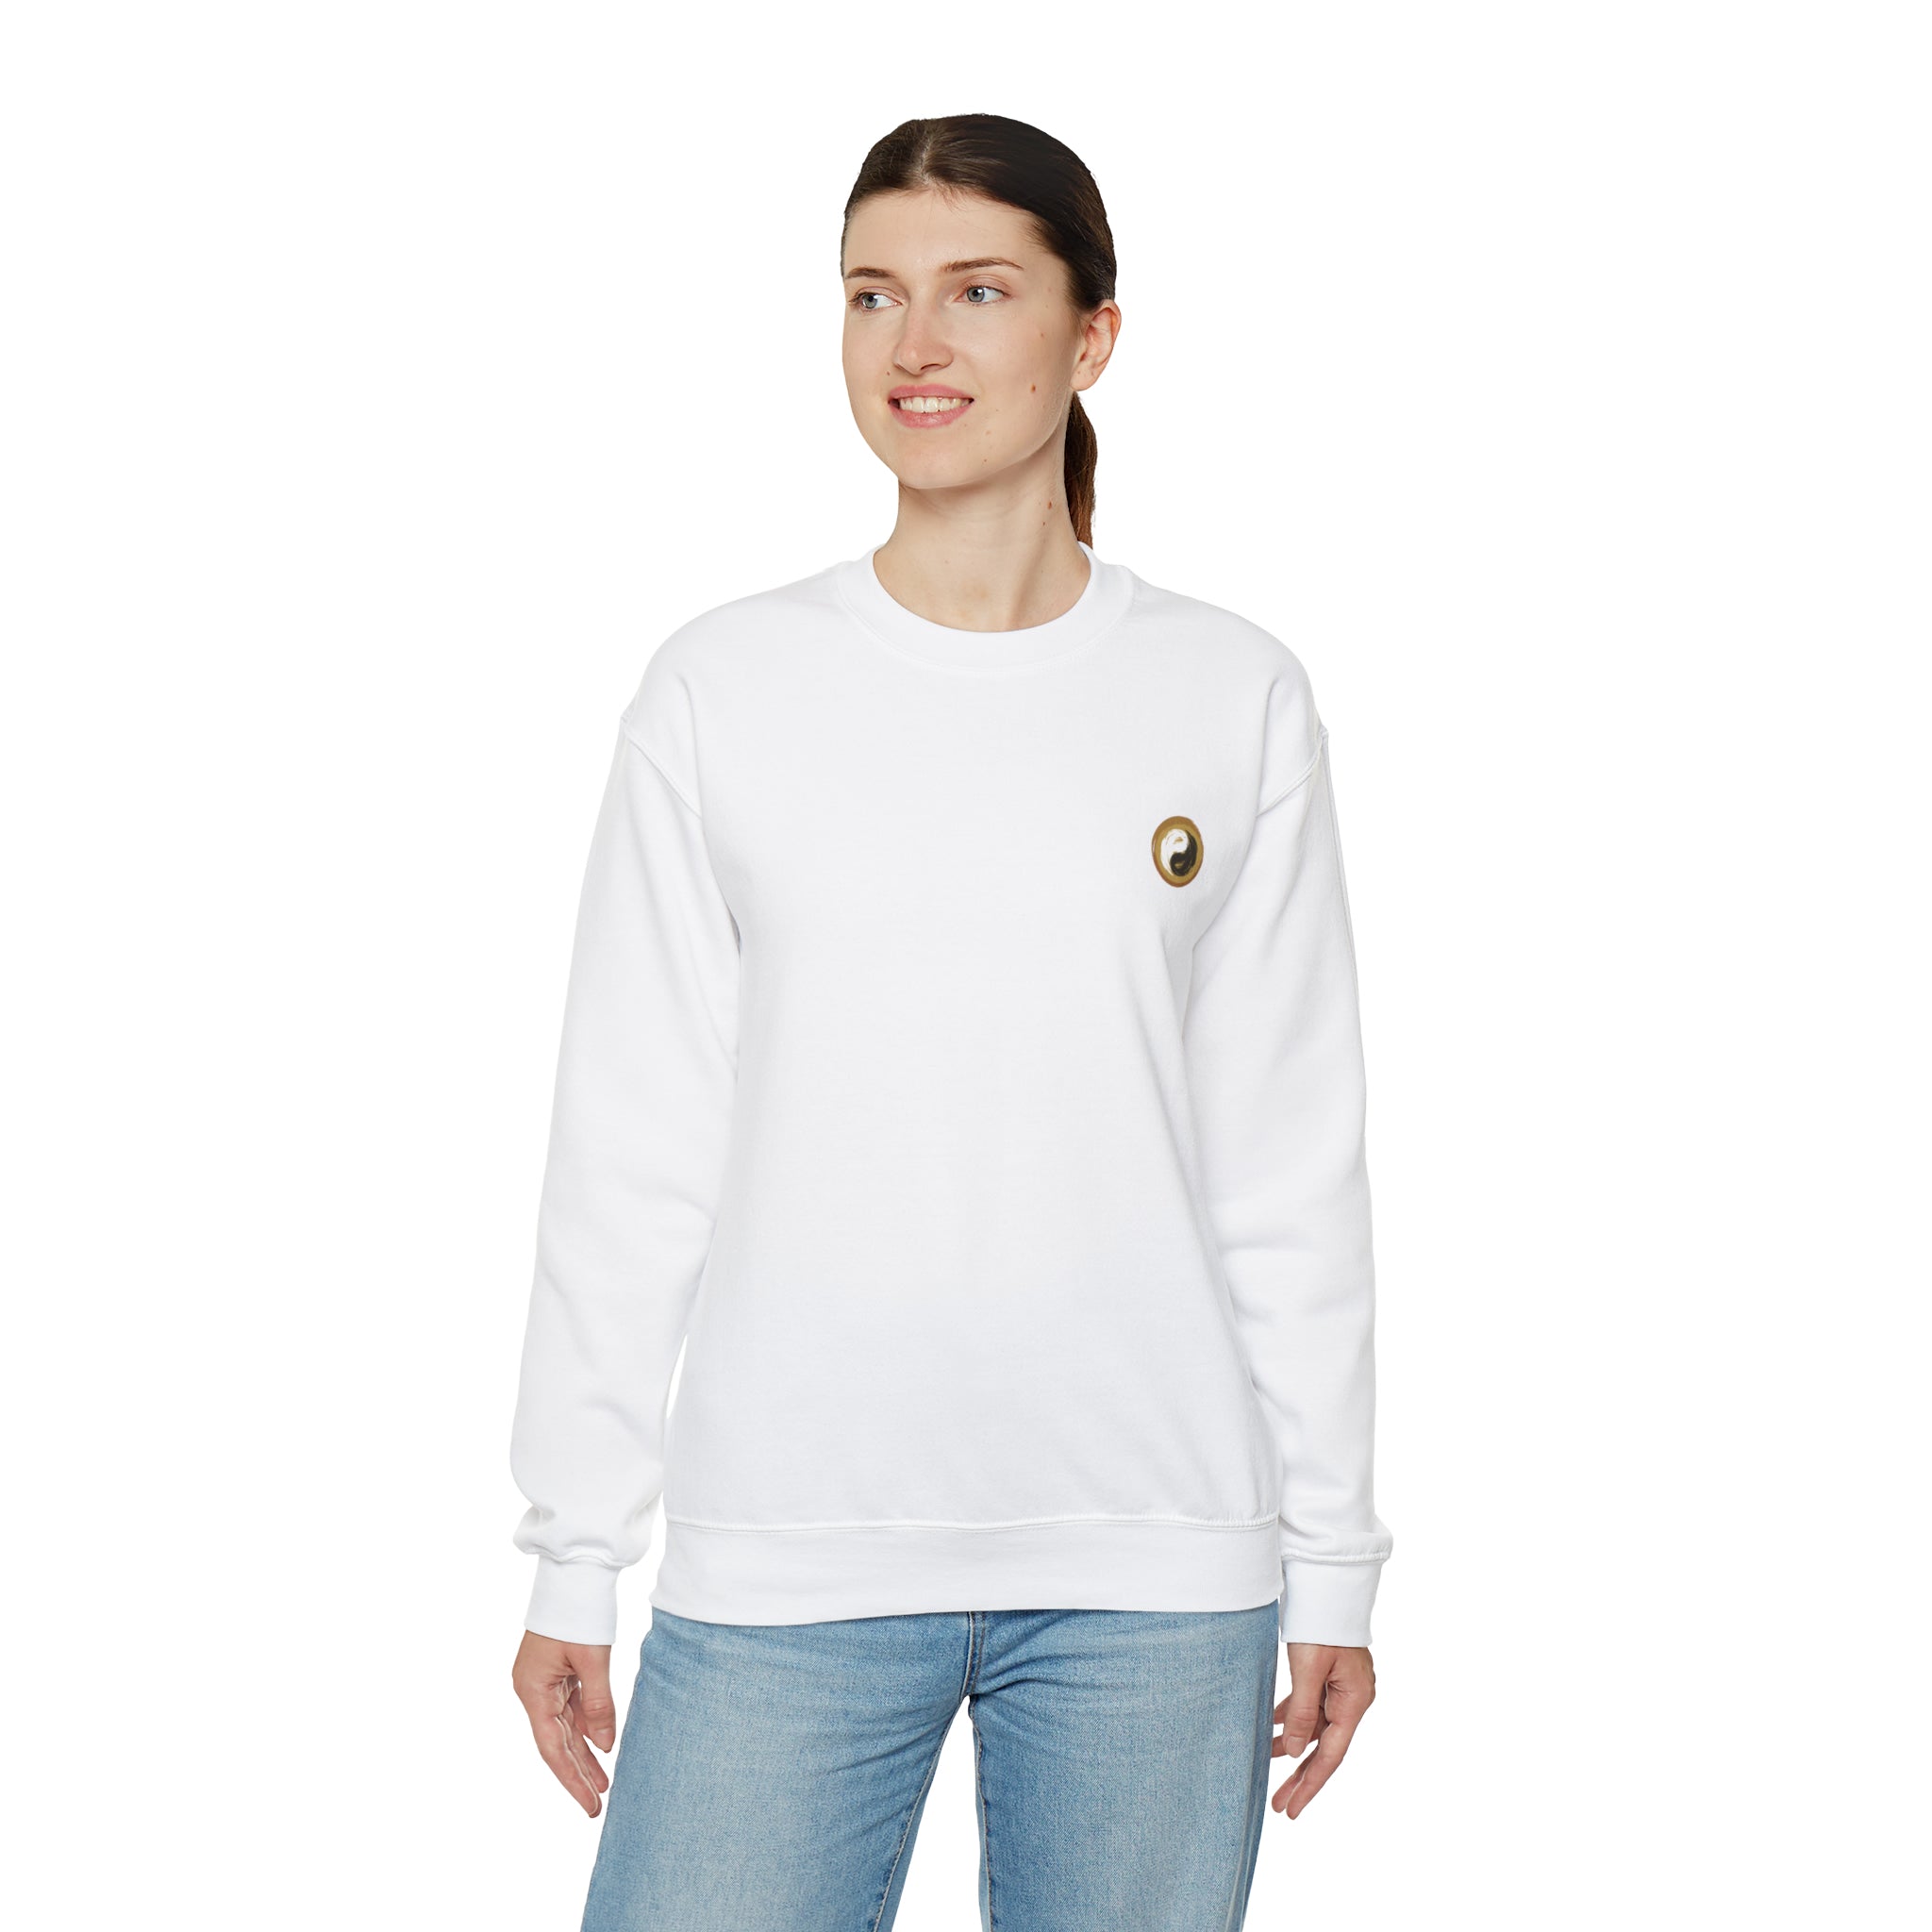 Unisex Heavy Blend Crewneck Sweatshirt - PersonalHour Style - Personal Hour for Yoga and Meditations 